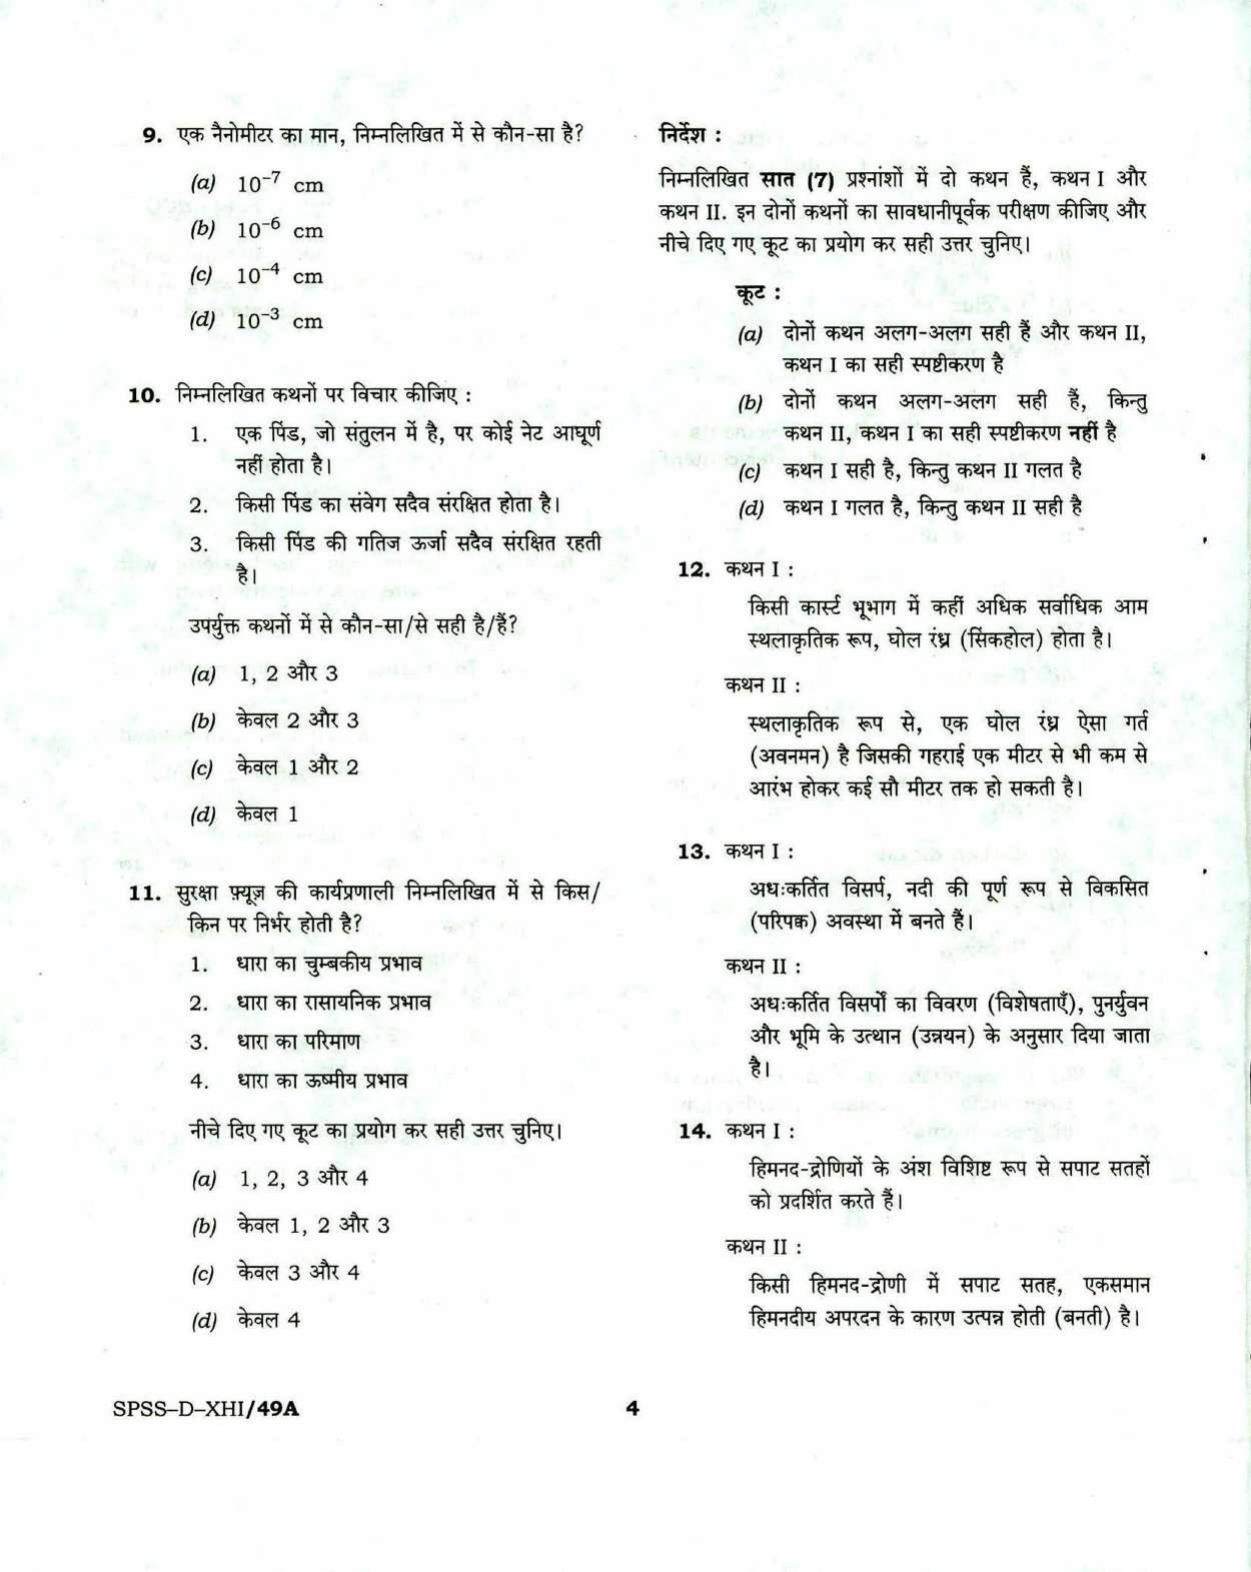 PBSSD General Knowledge Solved Papers - Page 4